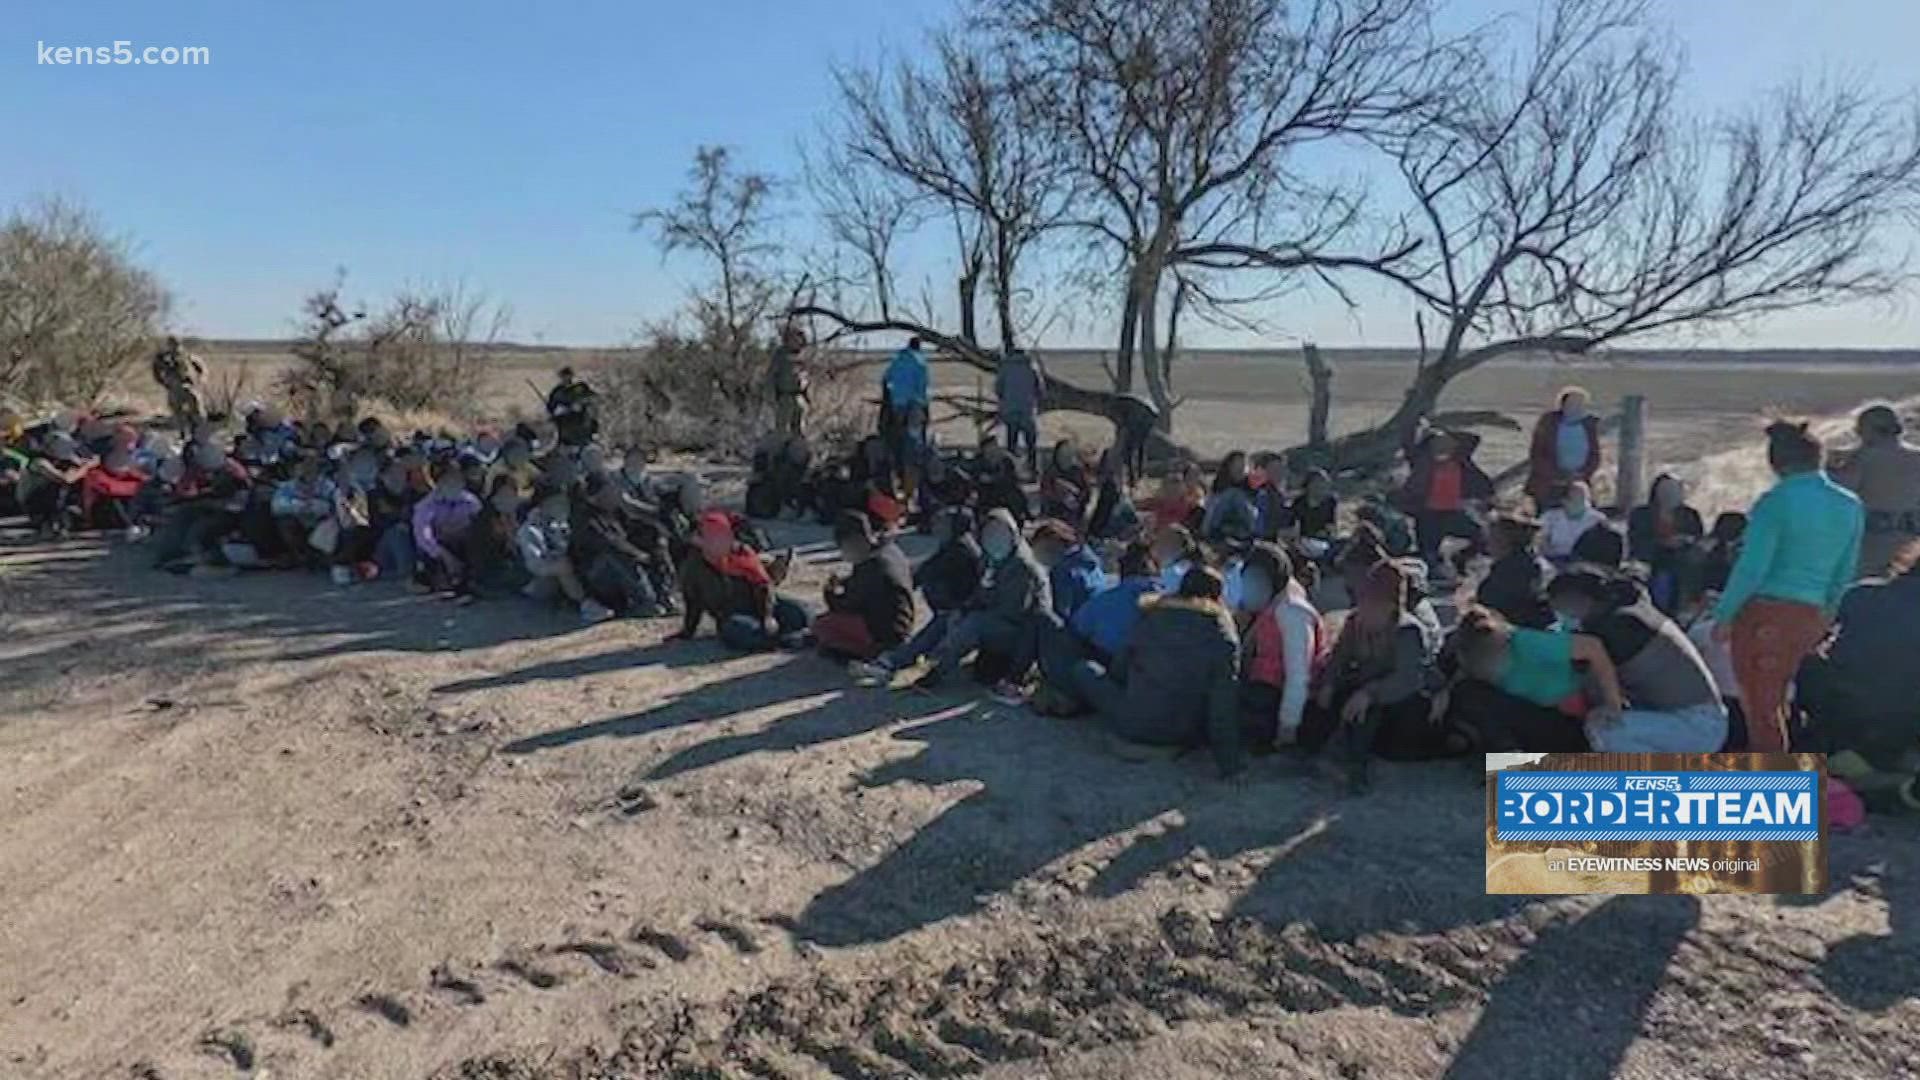 In the last three months of 2021, officials said they came across nearly half a million migrants which is double the amount from the same time in 2020.